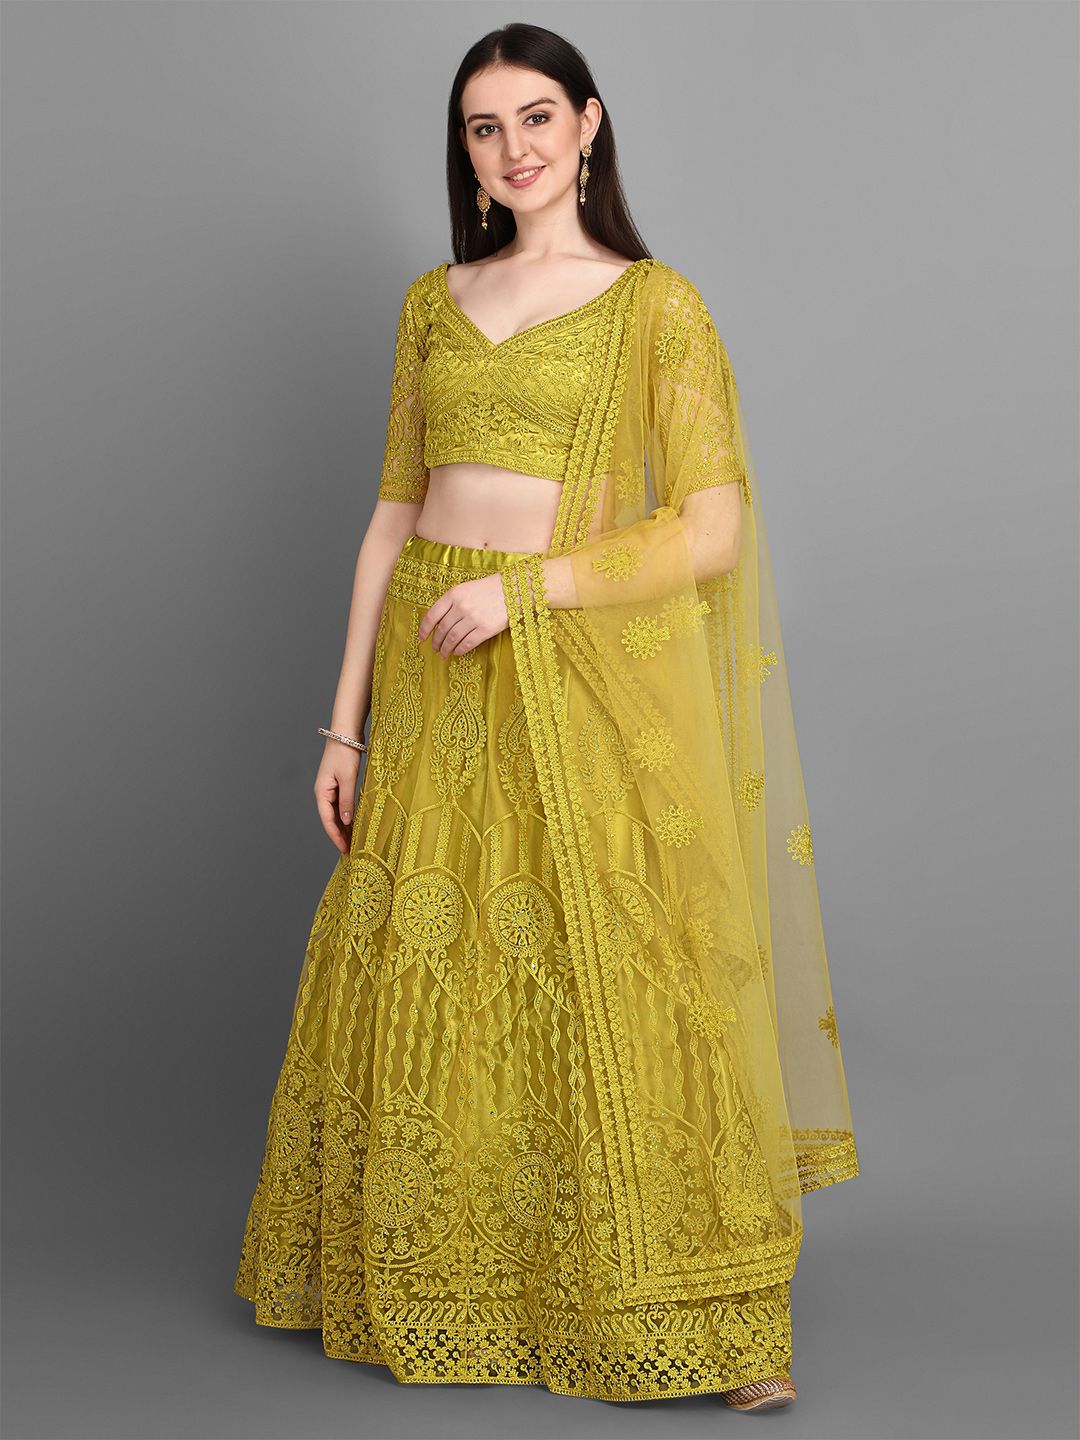 Bollyclues Mustard Embroidered Thread Work Semi-Stitched Lehenga & Unstitched Blouse With Dupatta Price in India